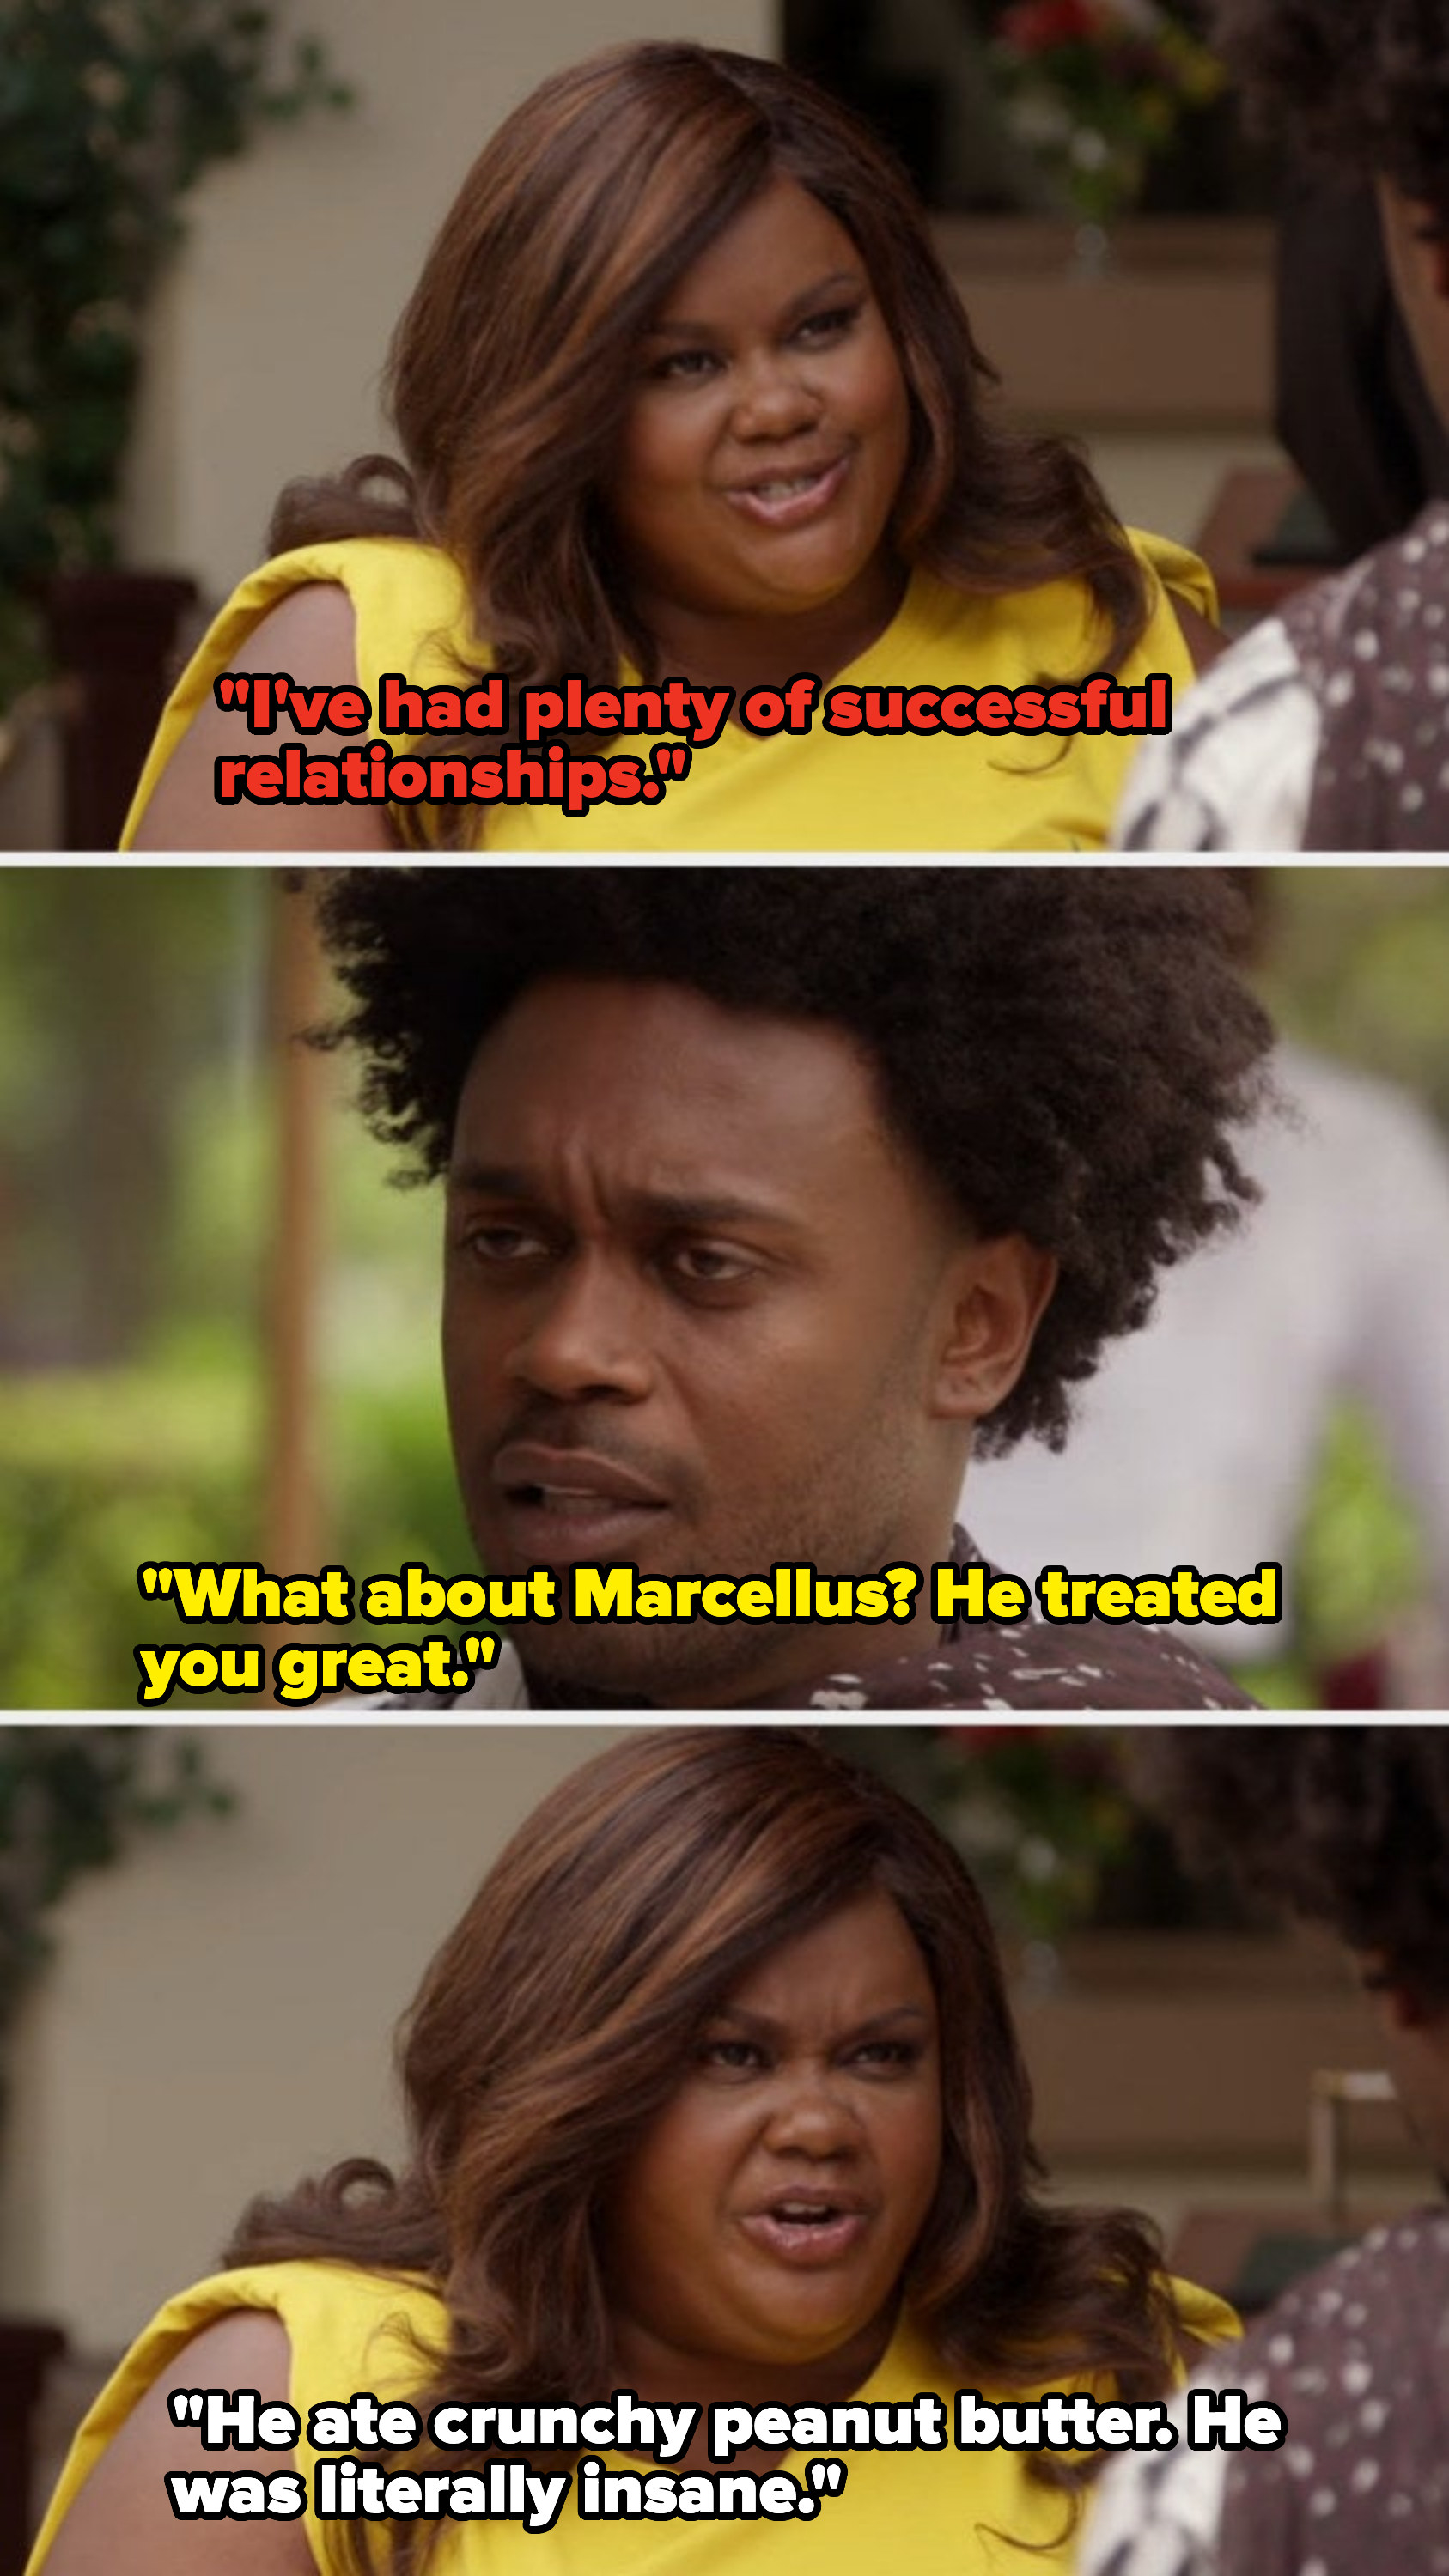 Nicky revisits the subject of her ex, Marcellus, who was a fan of crunchy peanut butter